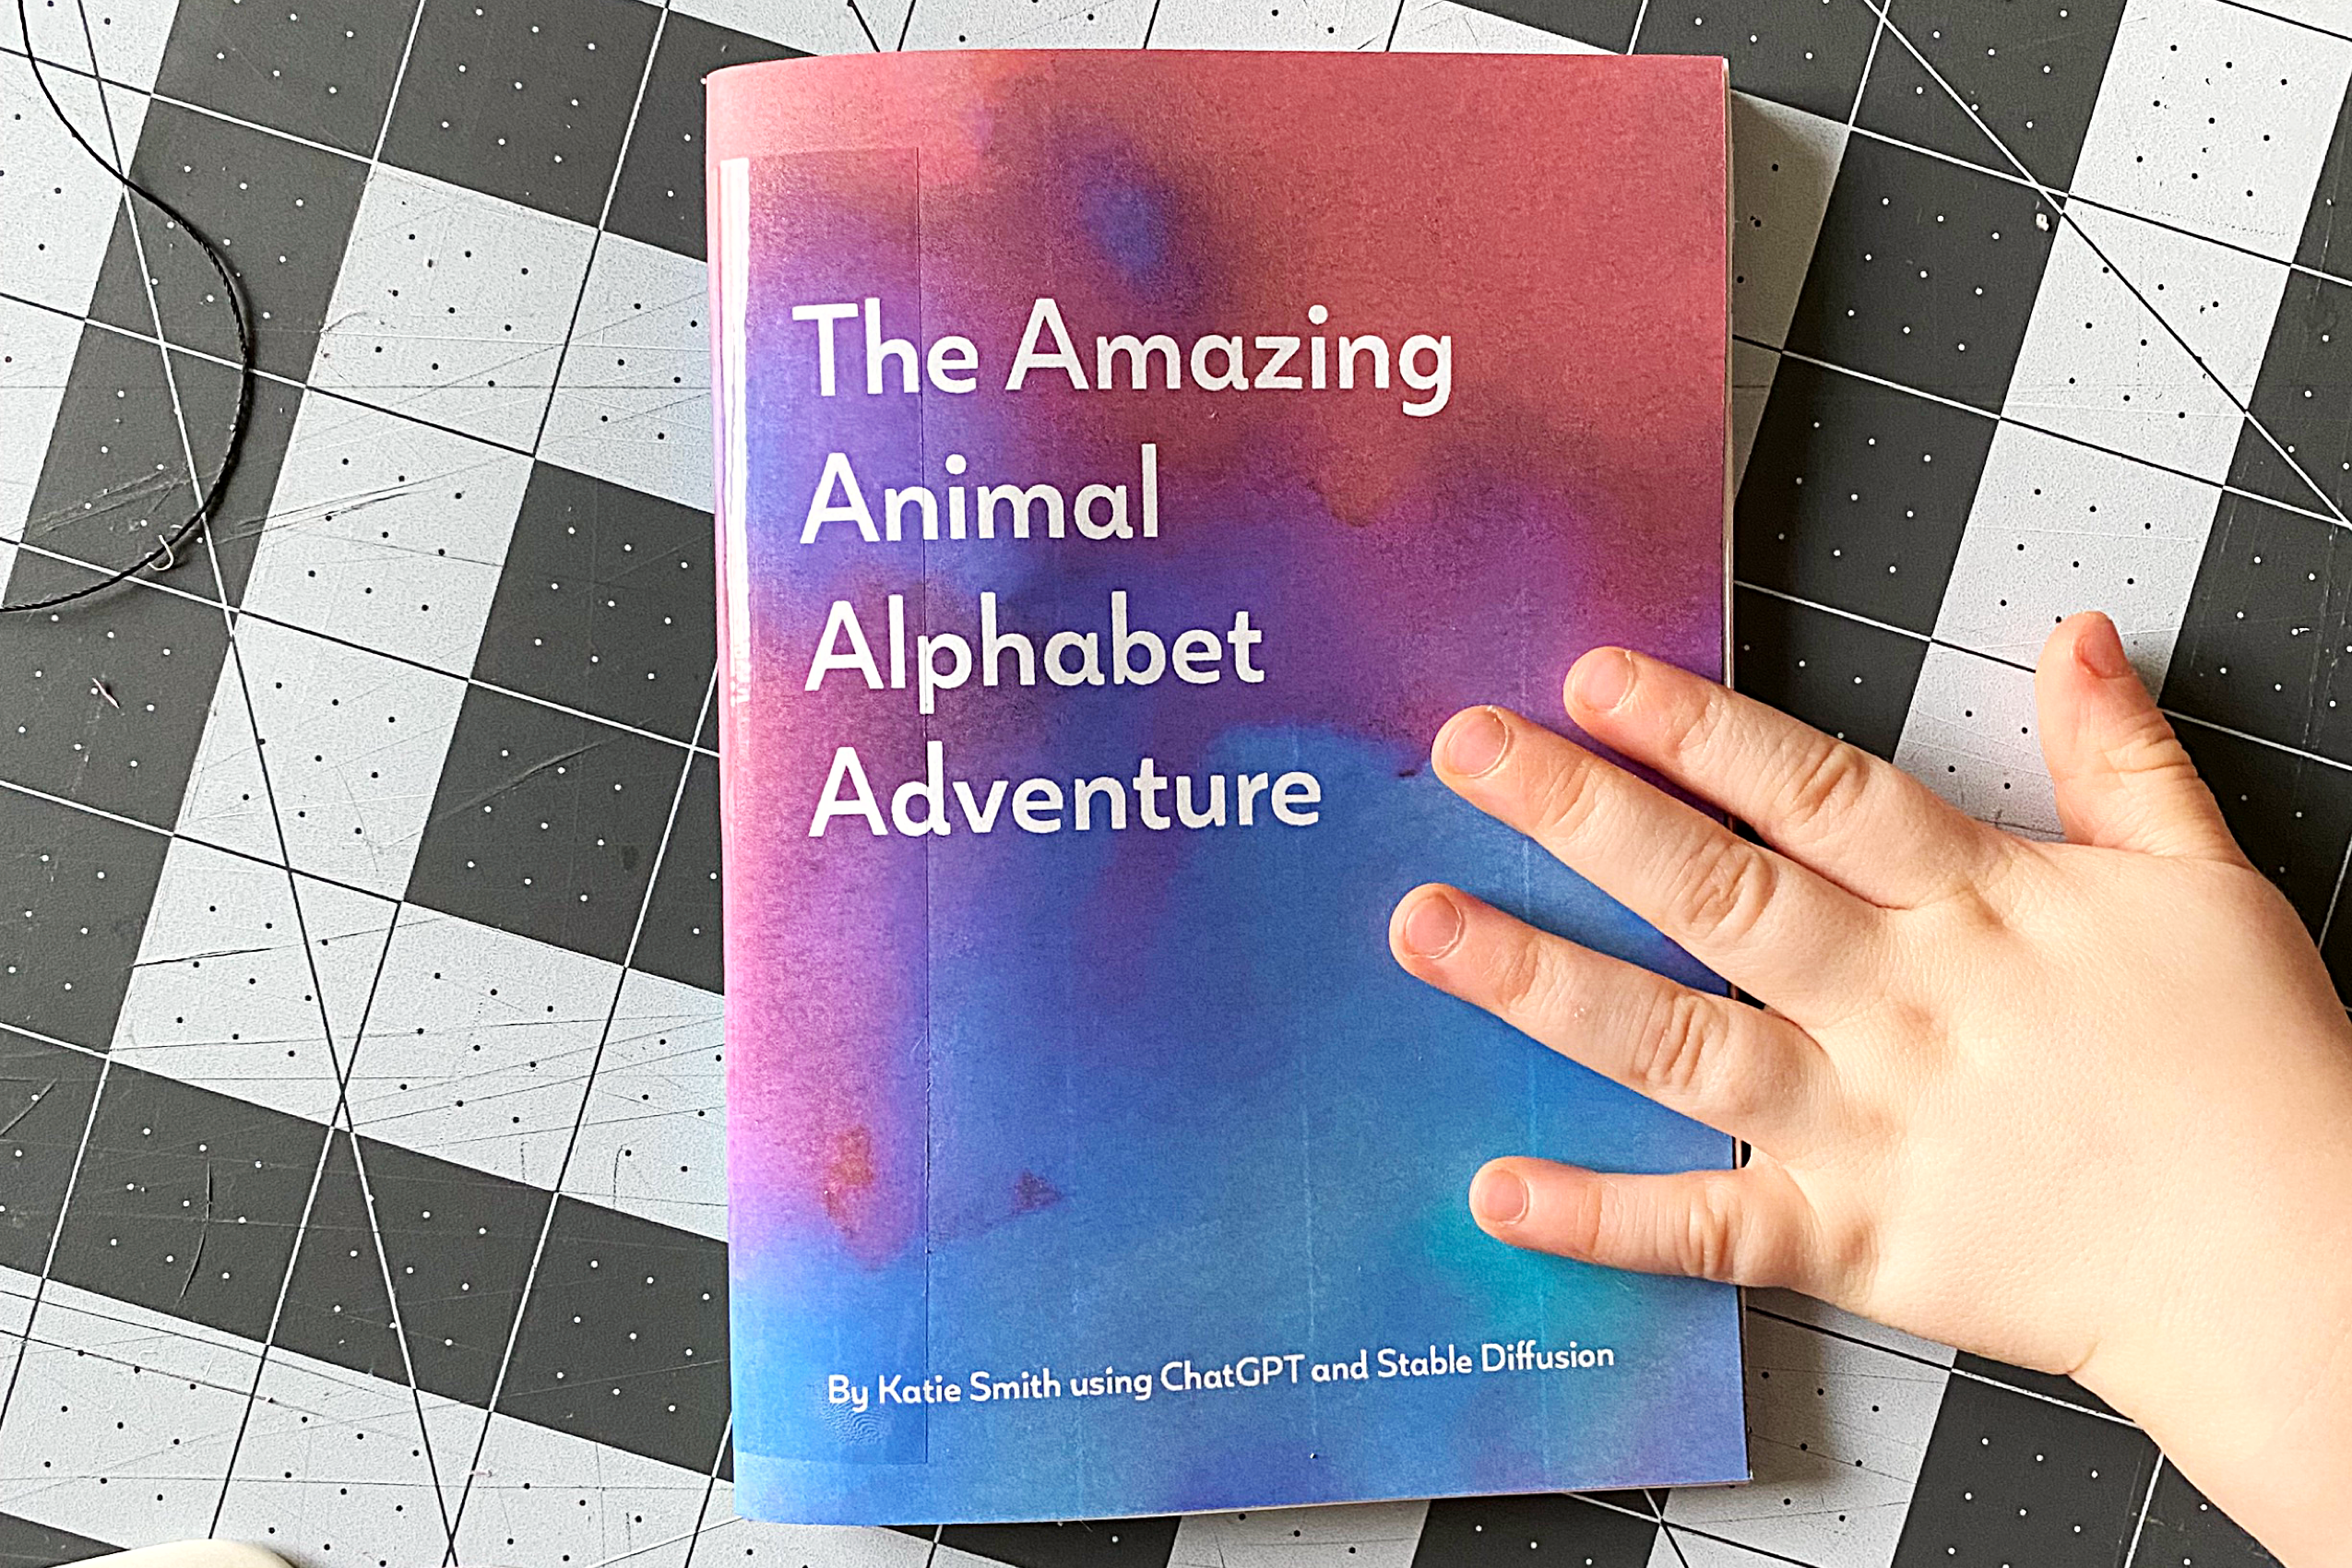 \"The Amazing Animal Alphabet Adventure\" book with a little boy's hand grabbing it off the table.